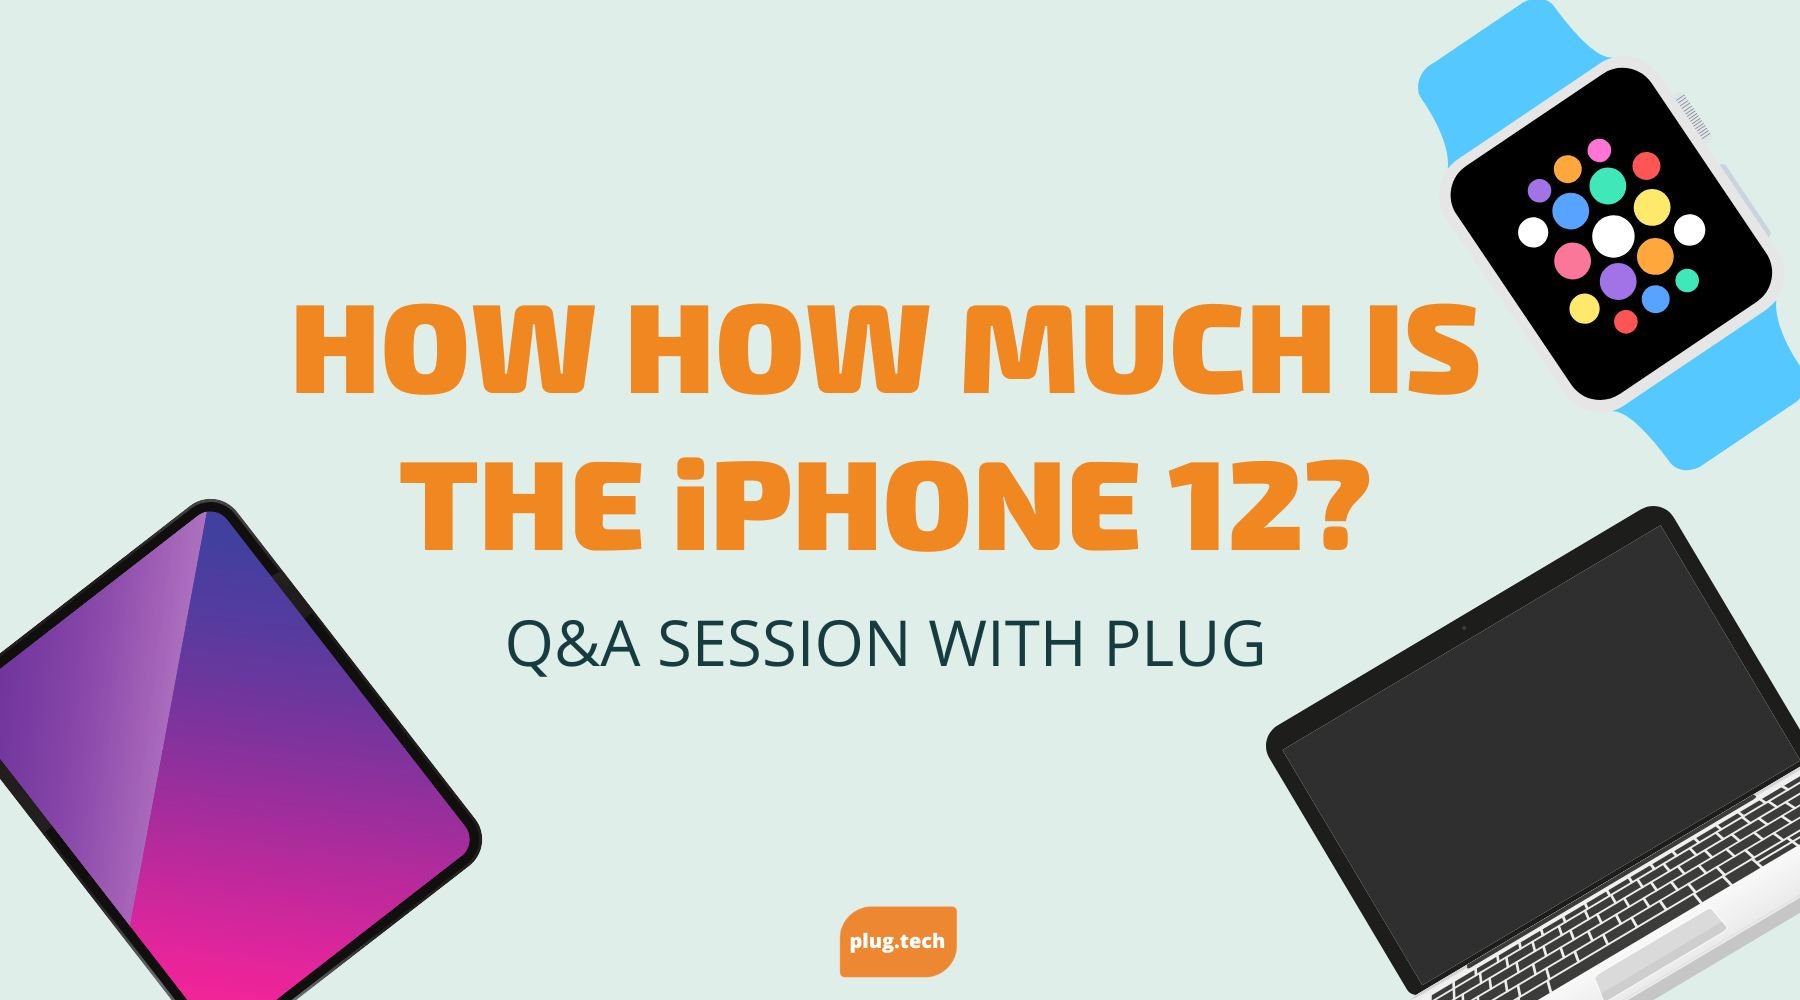 How much is the iPhone 12?